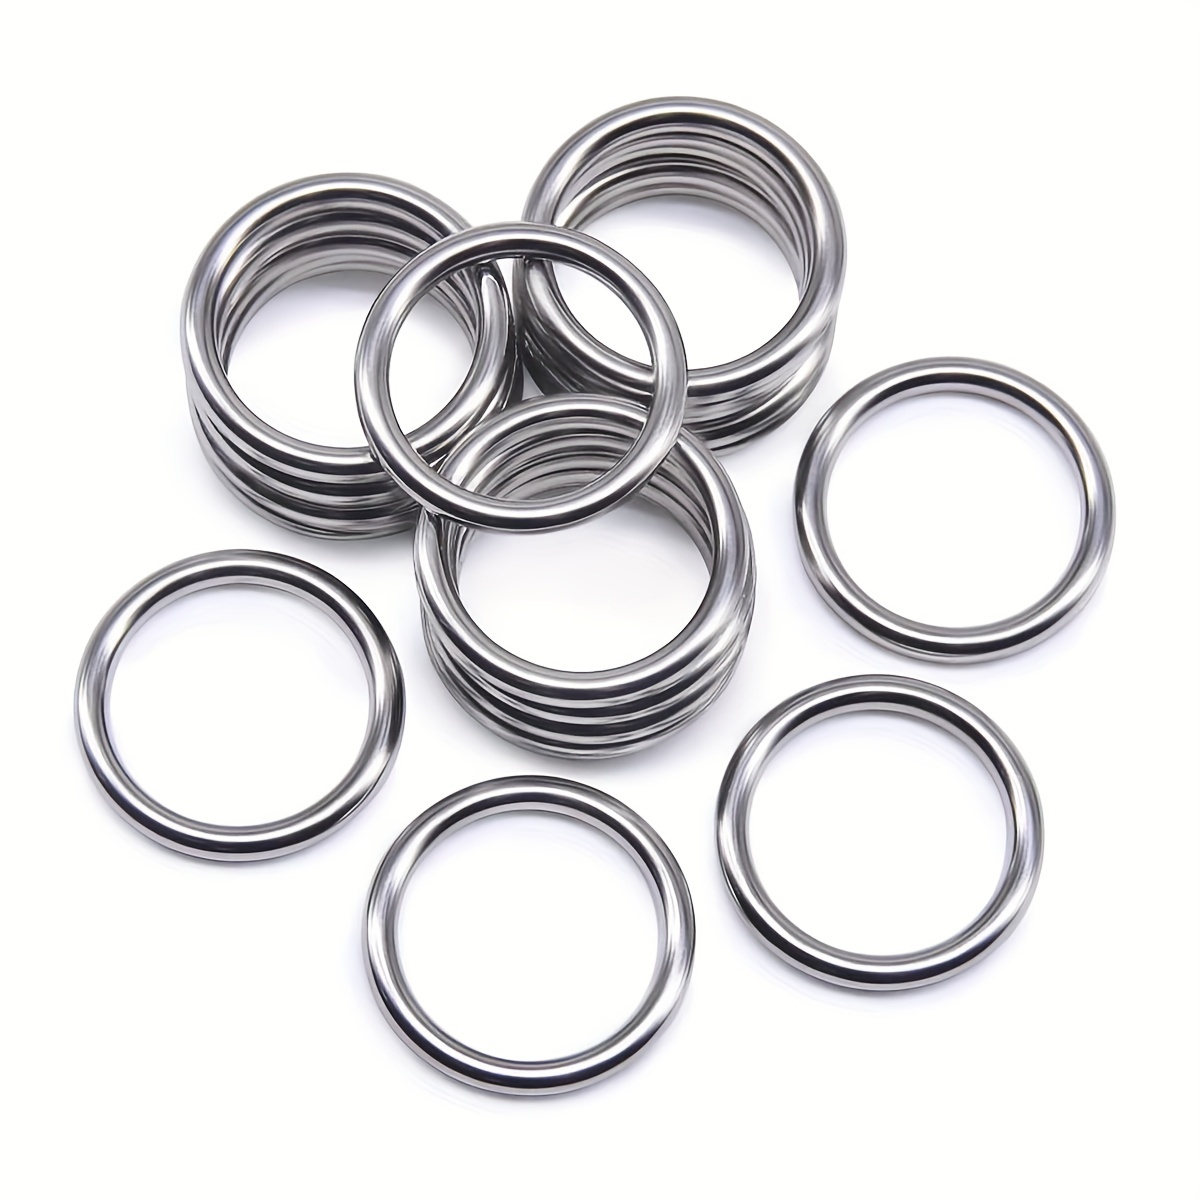 Metal O Rings Non-Welded O-Ring Buckle for Craft Belt Purse Bag